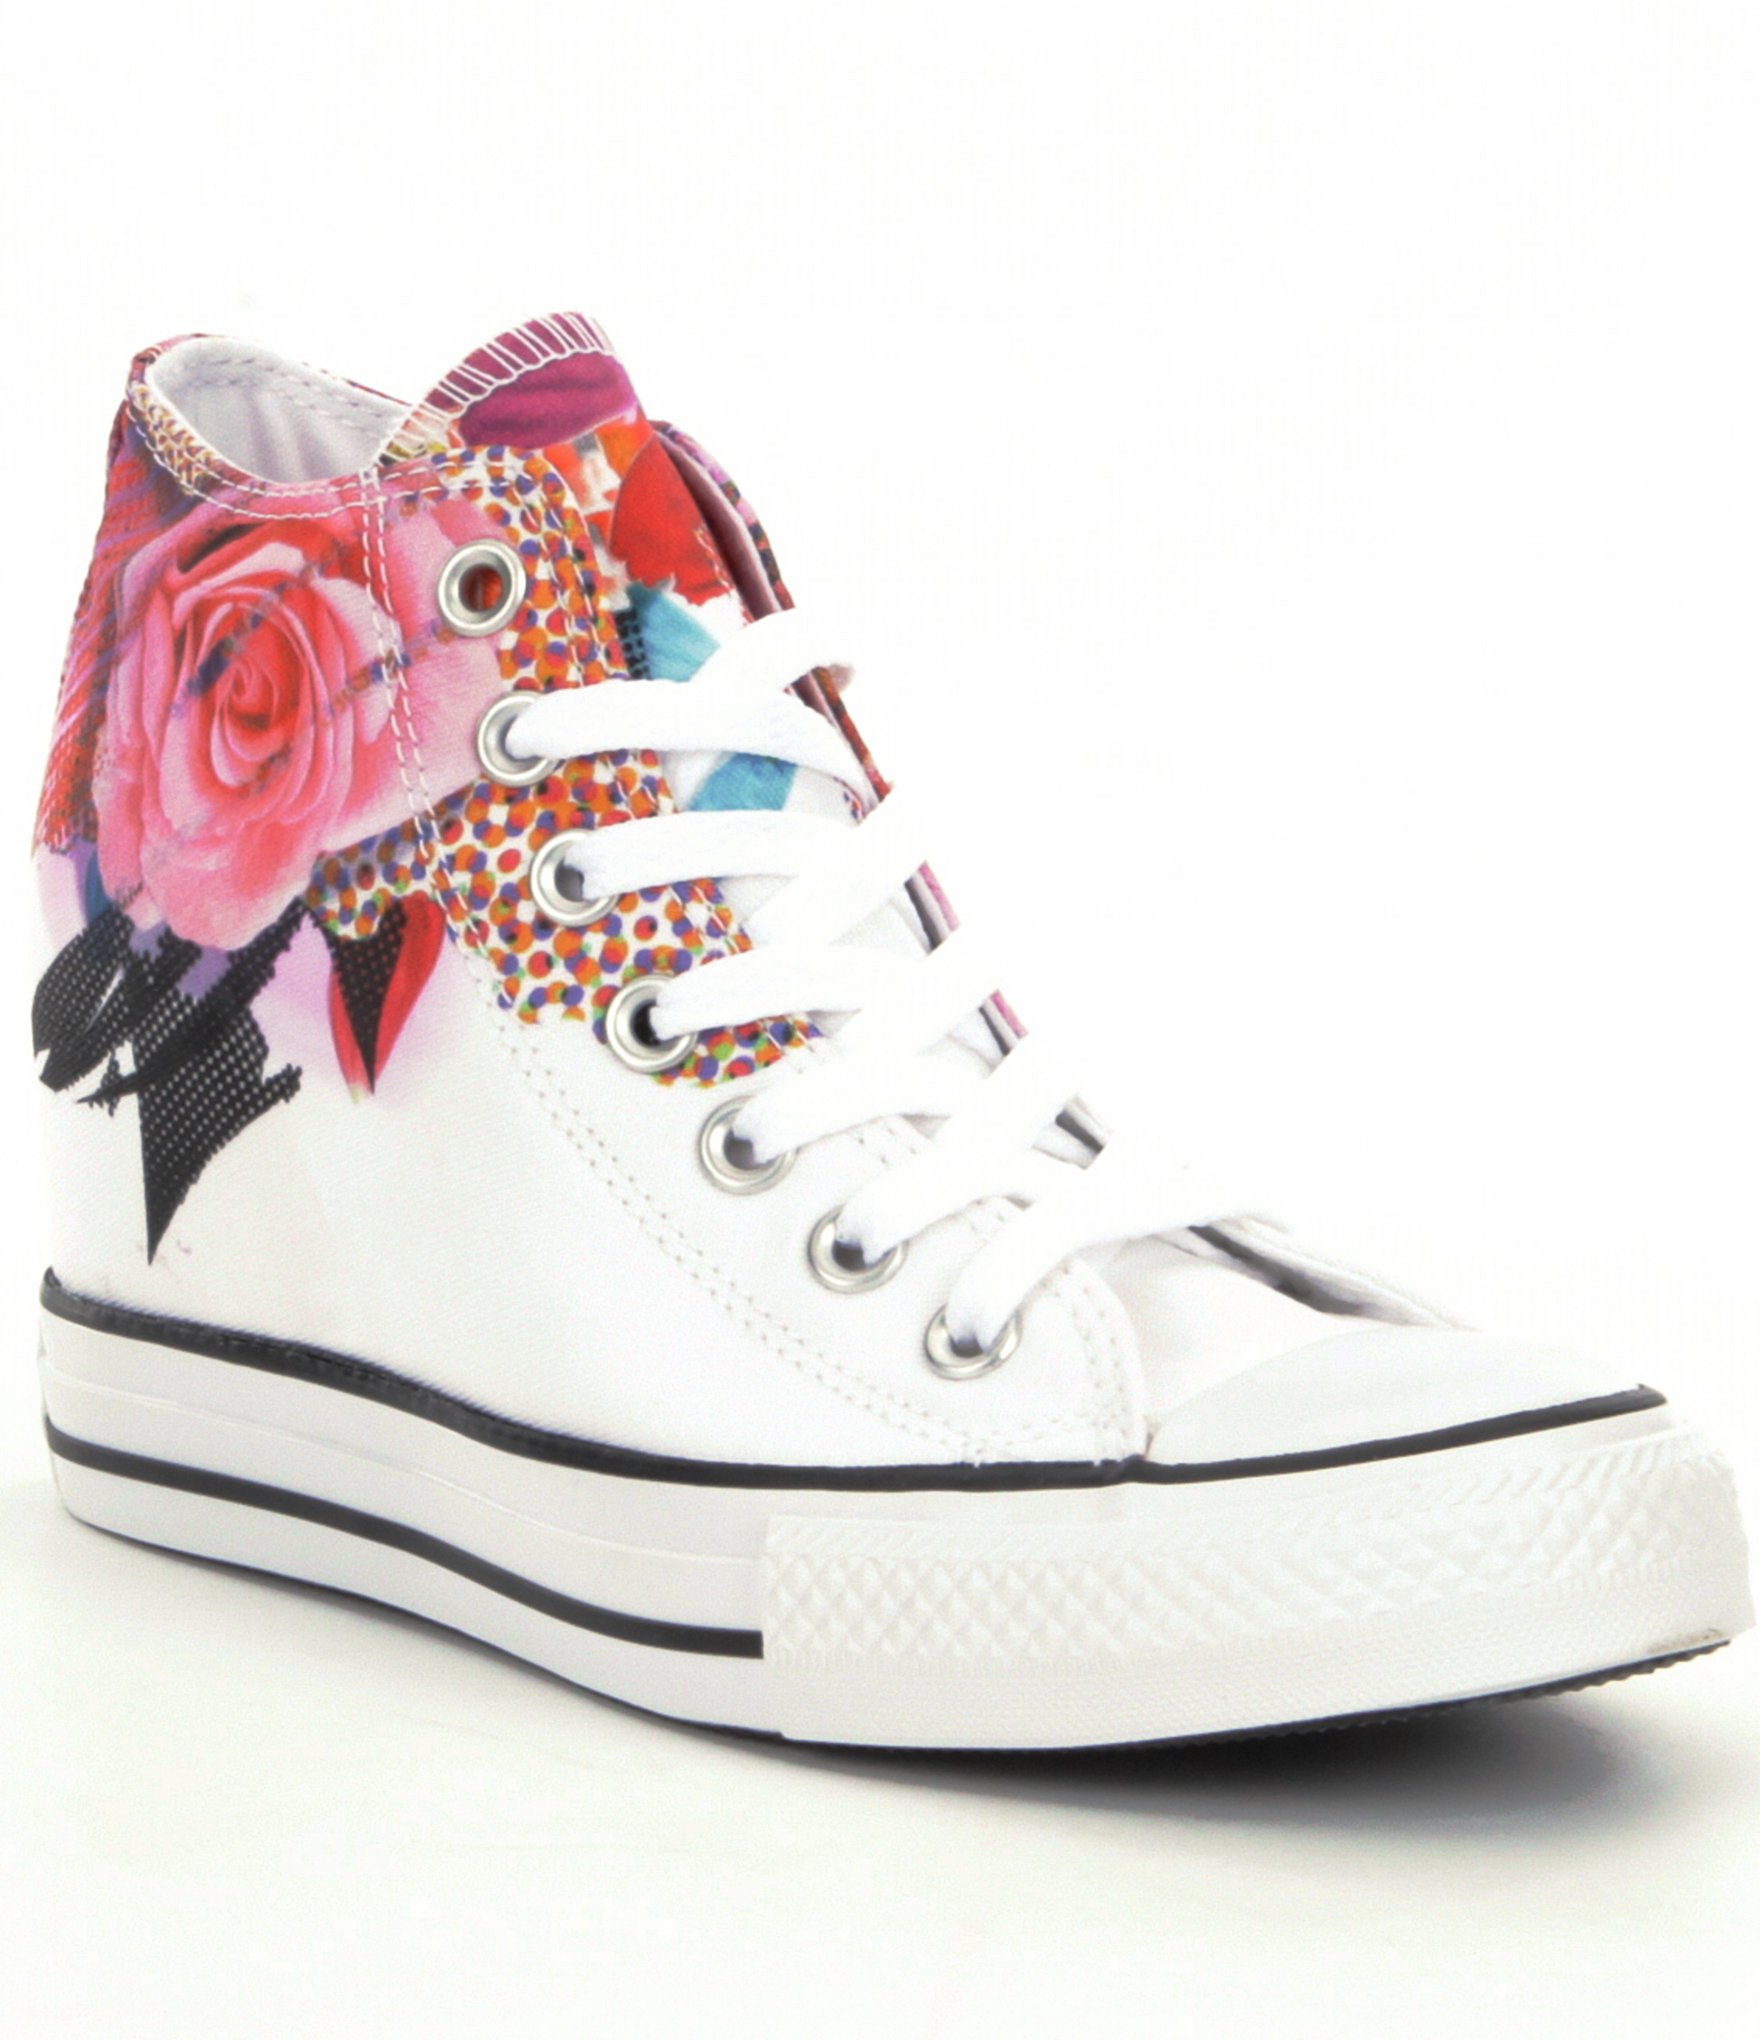 62 White Chuck taylor wedge shoes for Girls